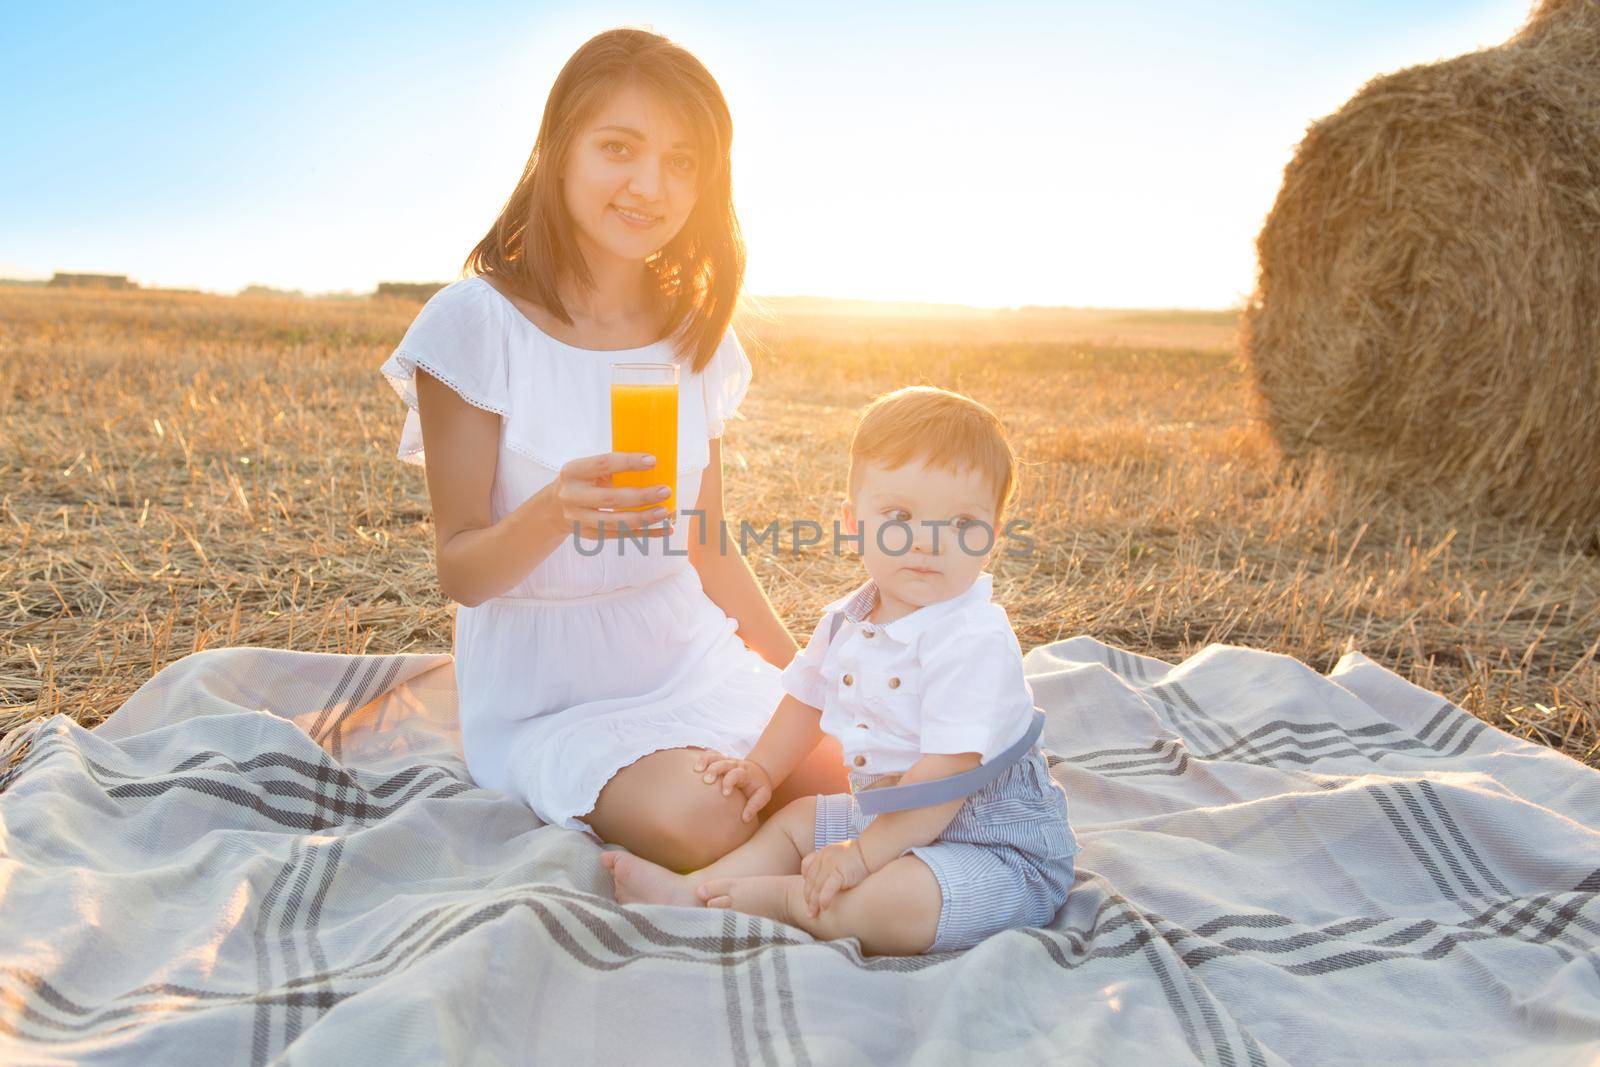 Mother and her son on holiday at a picnic. Mom is drinking orange juice. Happy family relaxing in nature. Healthy eating.